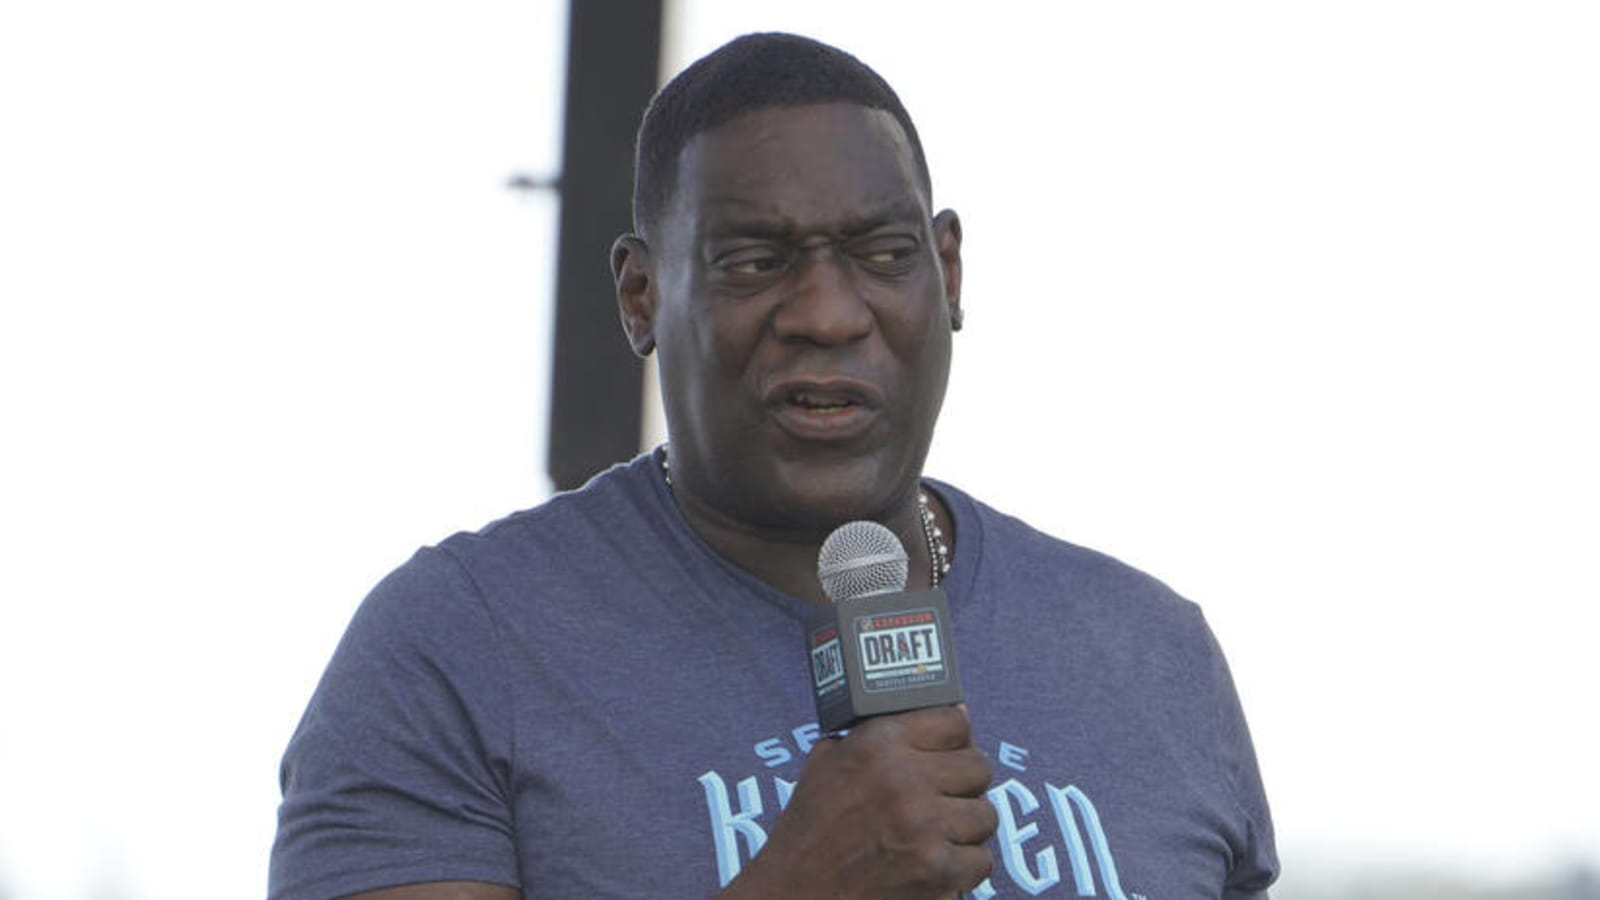 Shawn Kemp released after arrest for alleged drive-by shooting